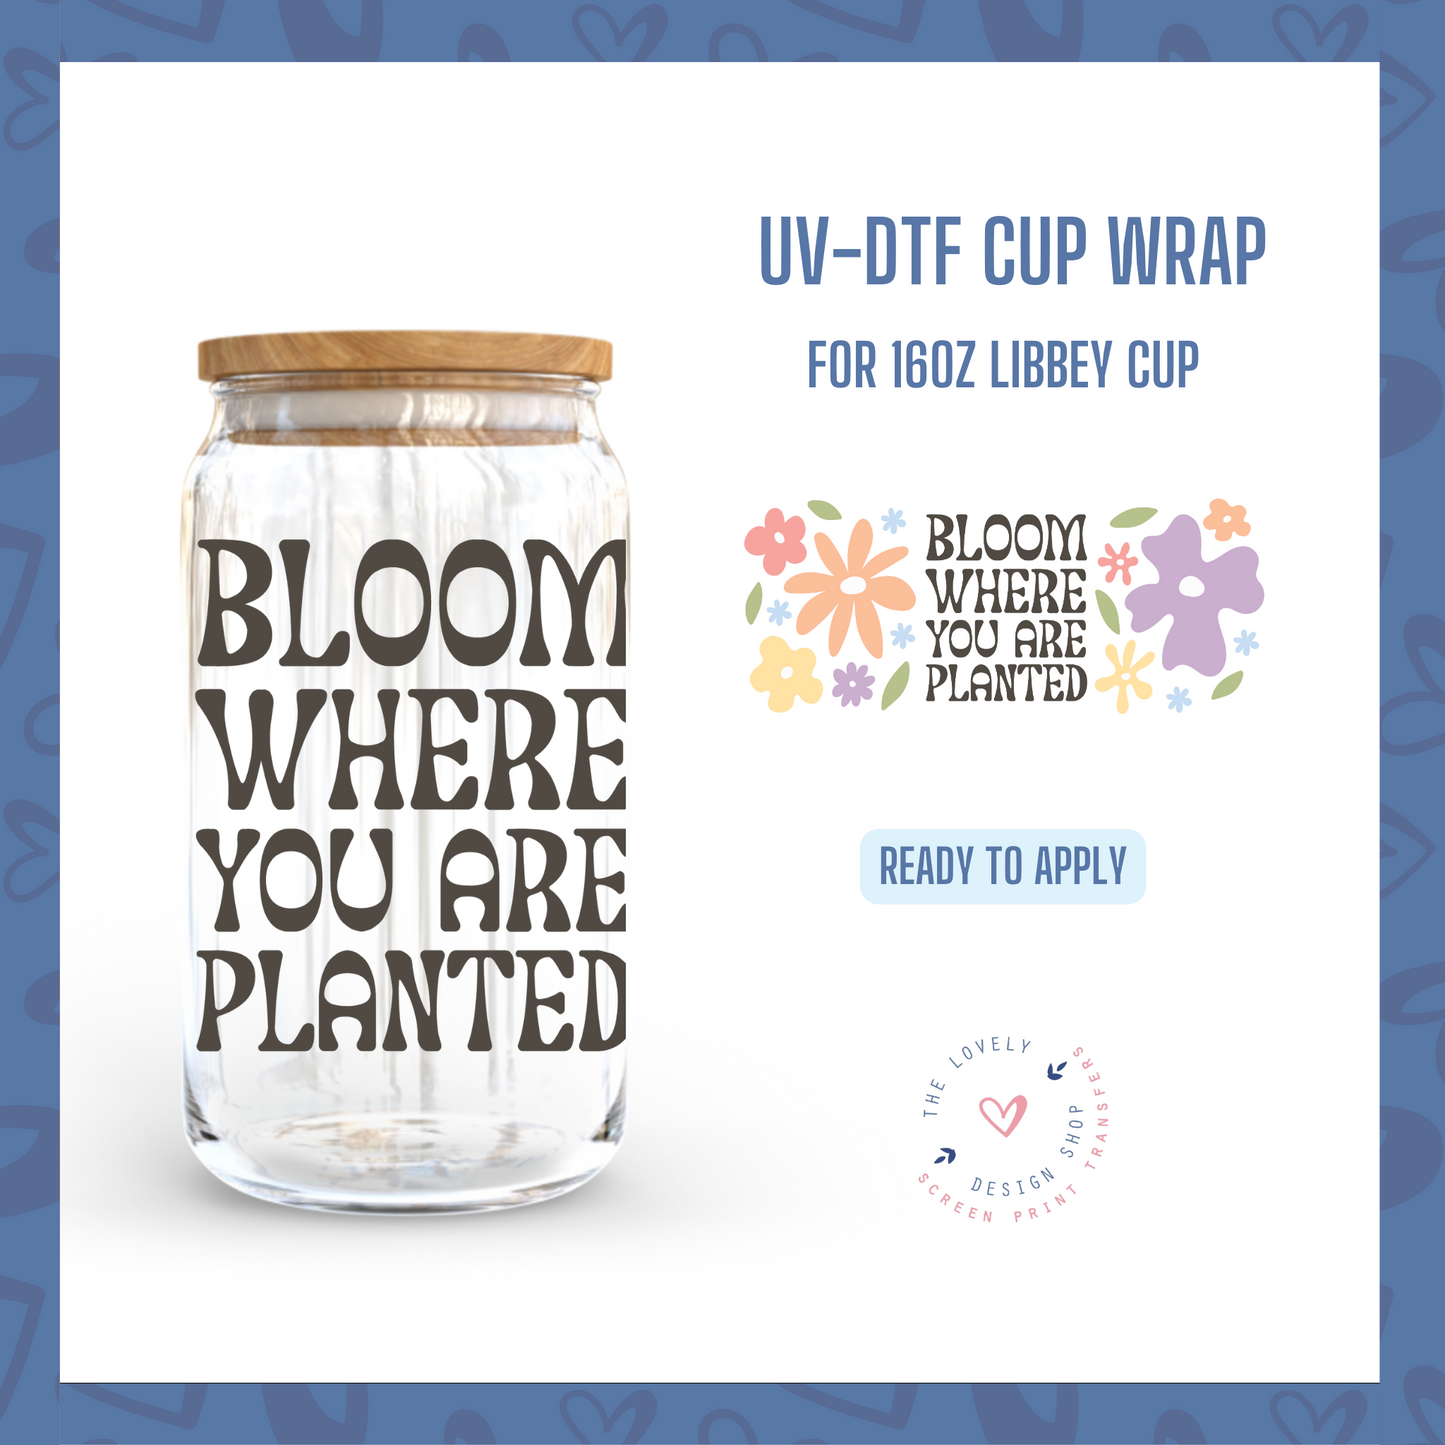 Bloom Where You Are Planted - UV DTF 16 oz Libbey Cup Wrap (Ready to Ship) May 20